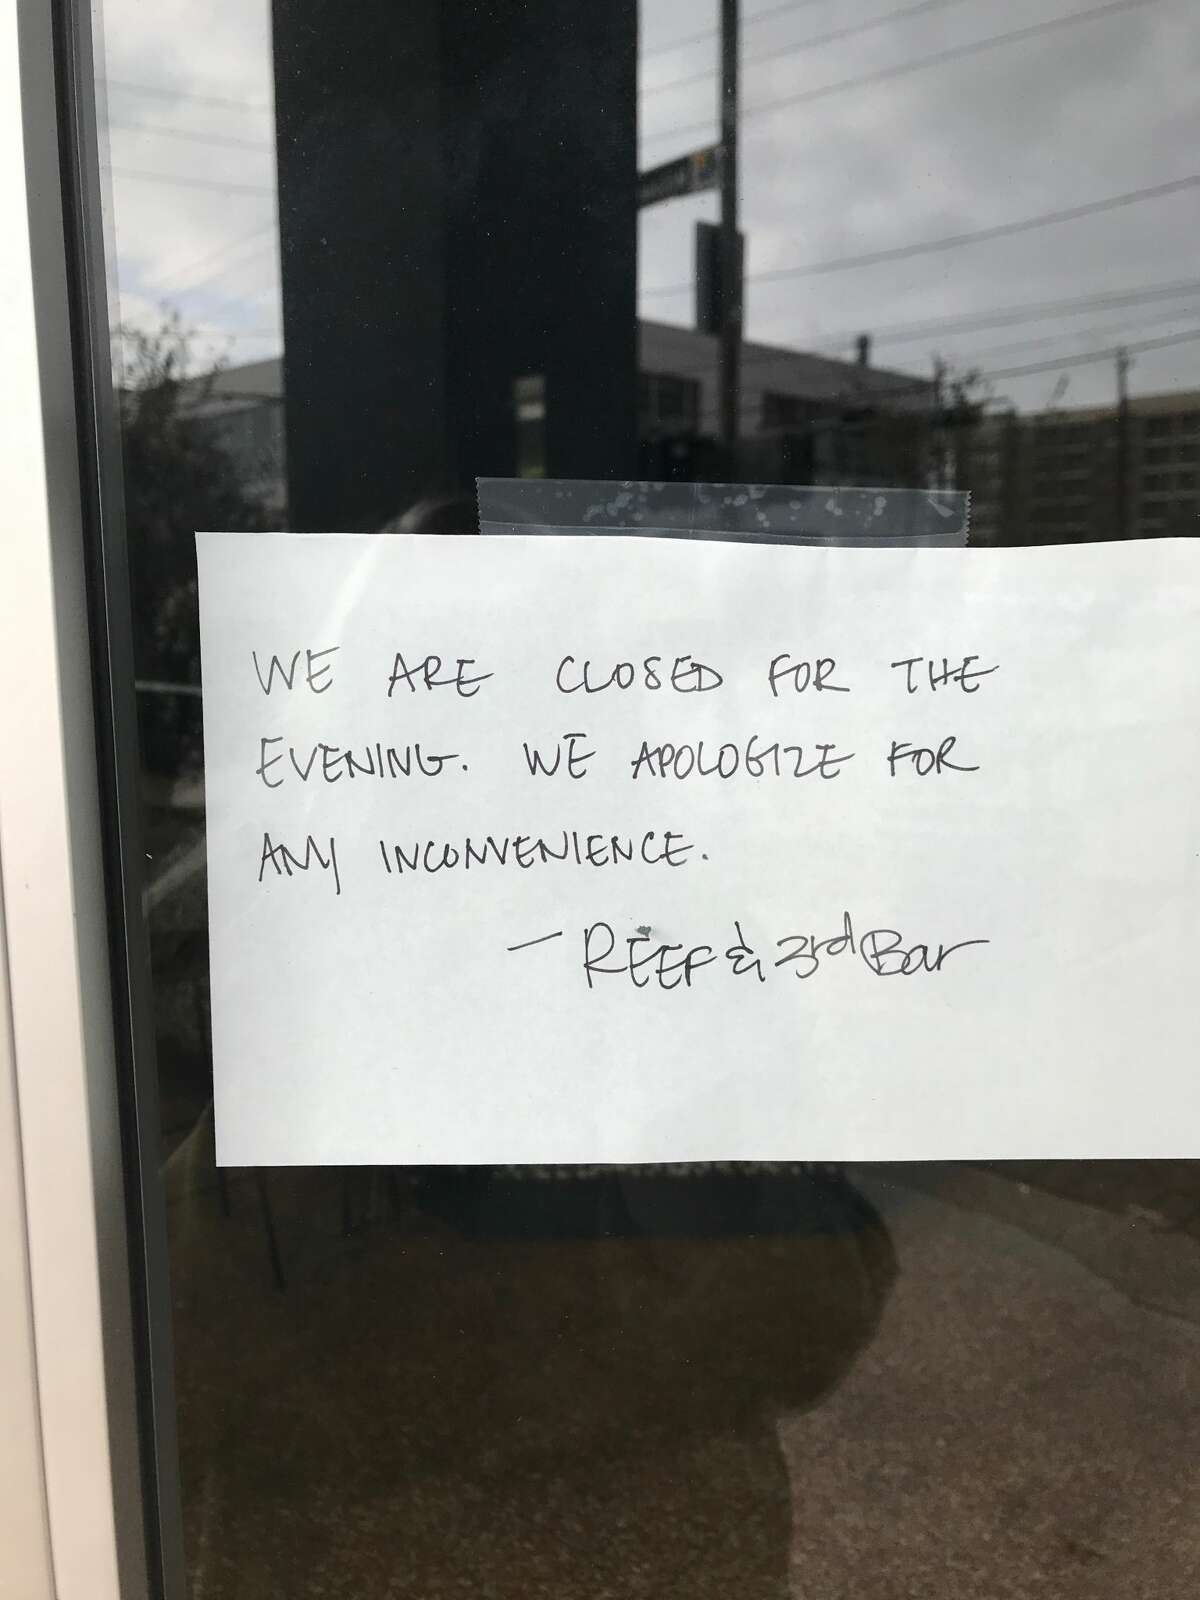 Reef, at 2600 Travis St., from chef Bryan Caswell closed its doors on Monday, a representative for the restaurant confirmed via email Tuesday.